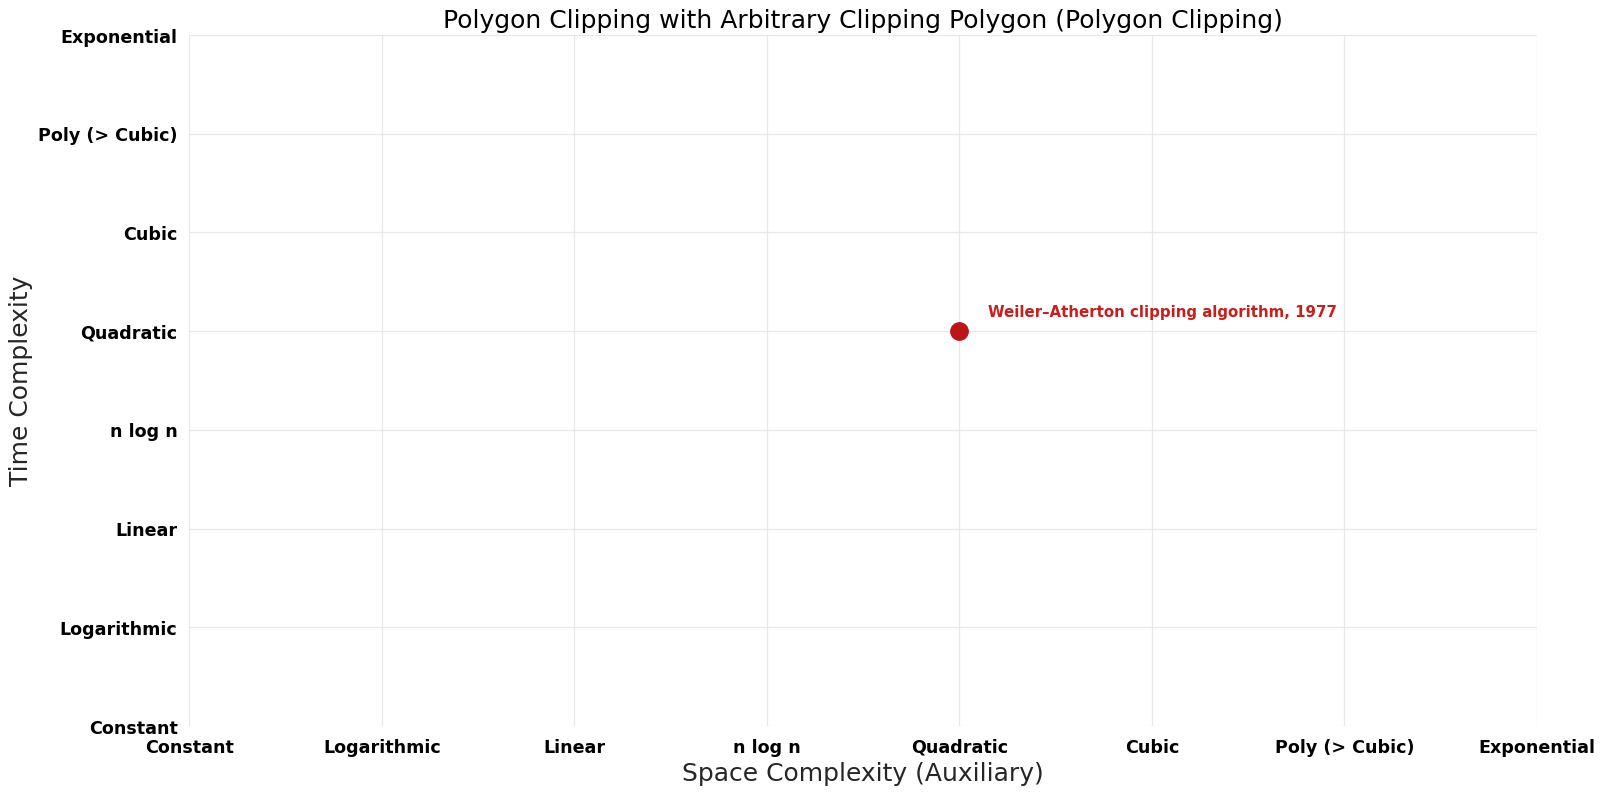 Polygon Clipping - Polygon Clipping with Arbitrary Clipping Polygon - Pareto Frontier.png